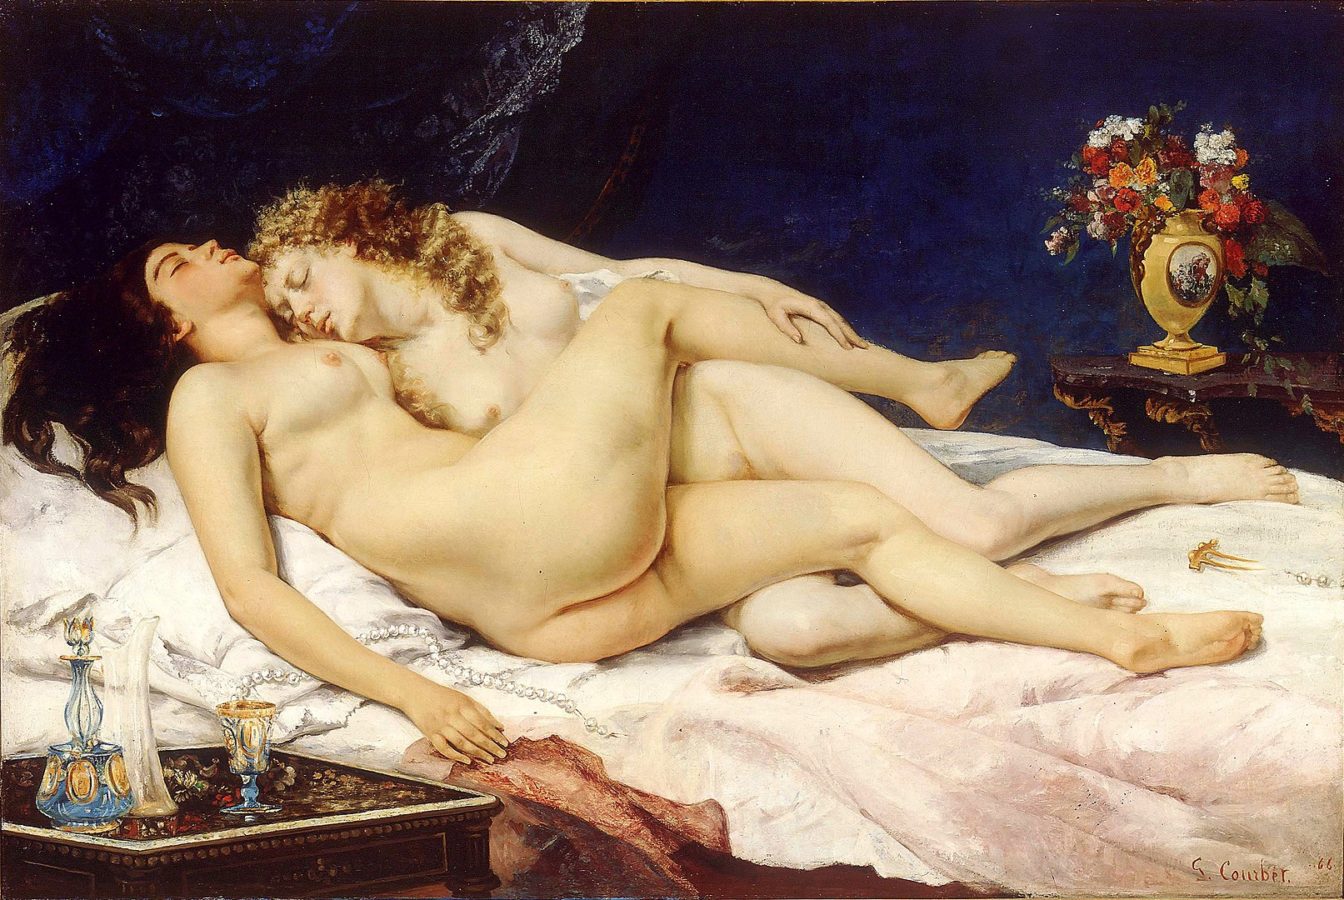 two women asleep in each other's arms; Courbet scandalous nudes